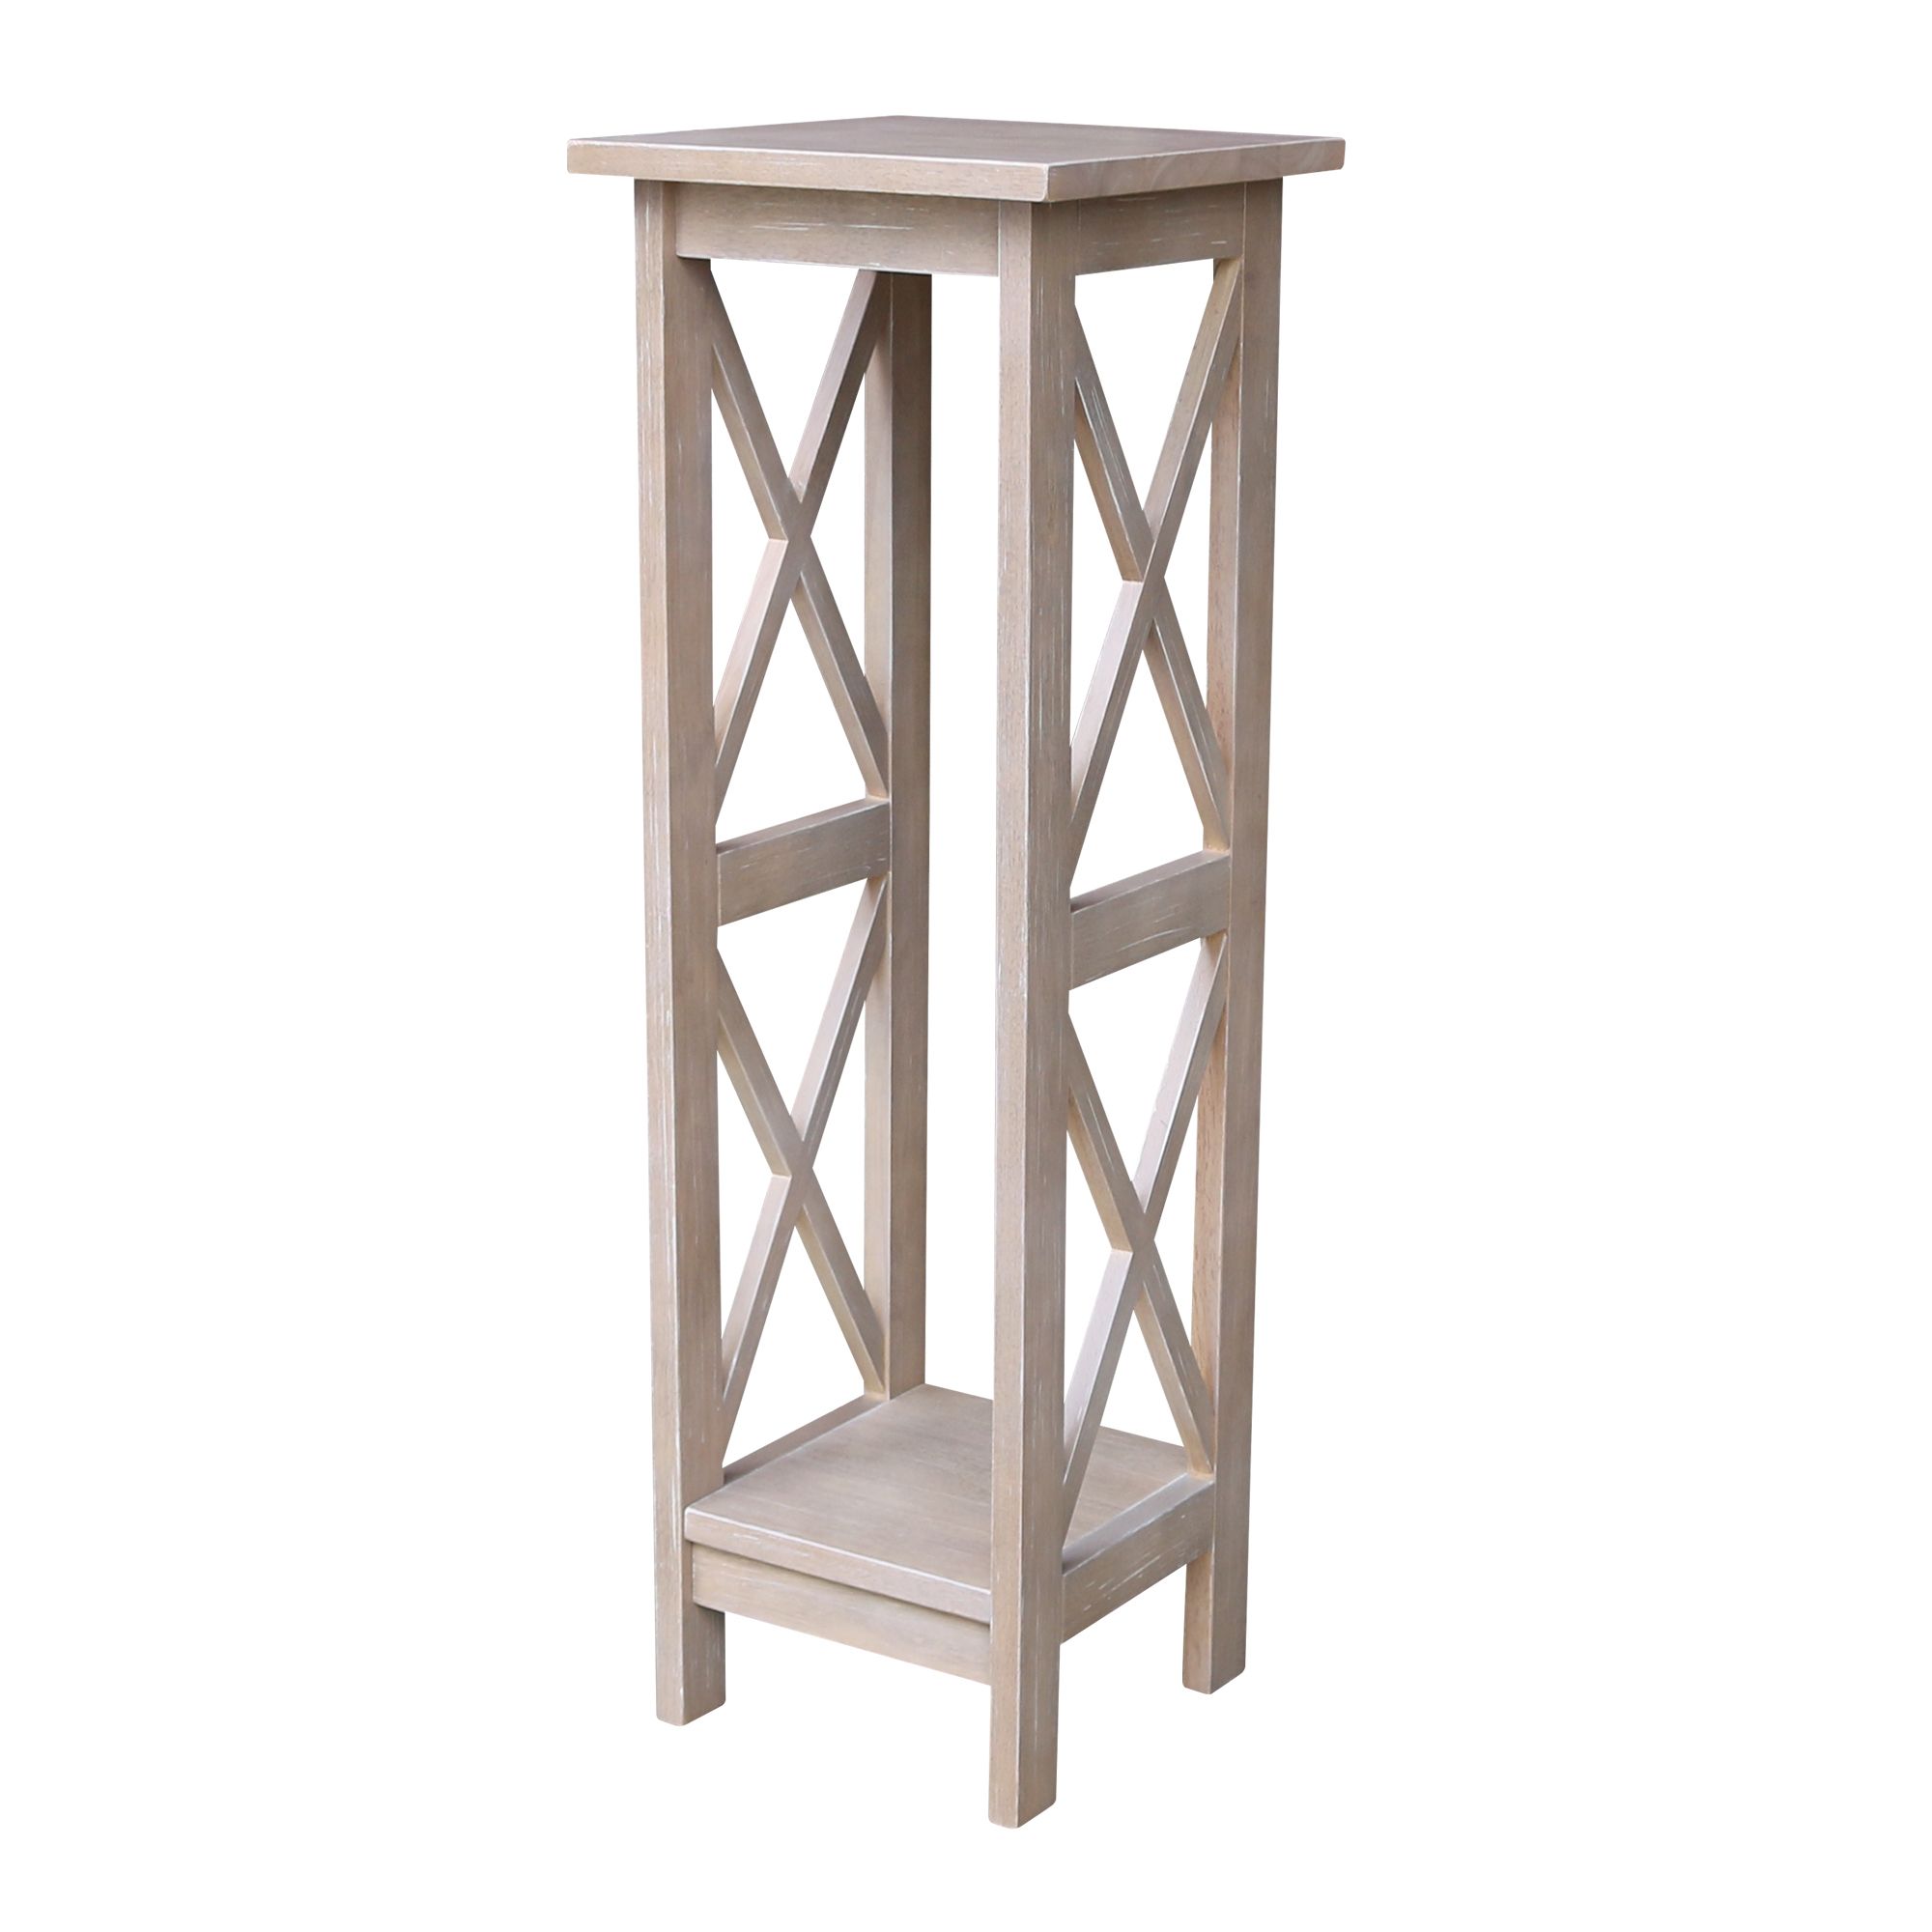 Solid Wood X Sided Plant Stand In Washed Gray Taupe – Walmart In Weathered Gray Plant Stands (View 10 of 15)